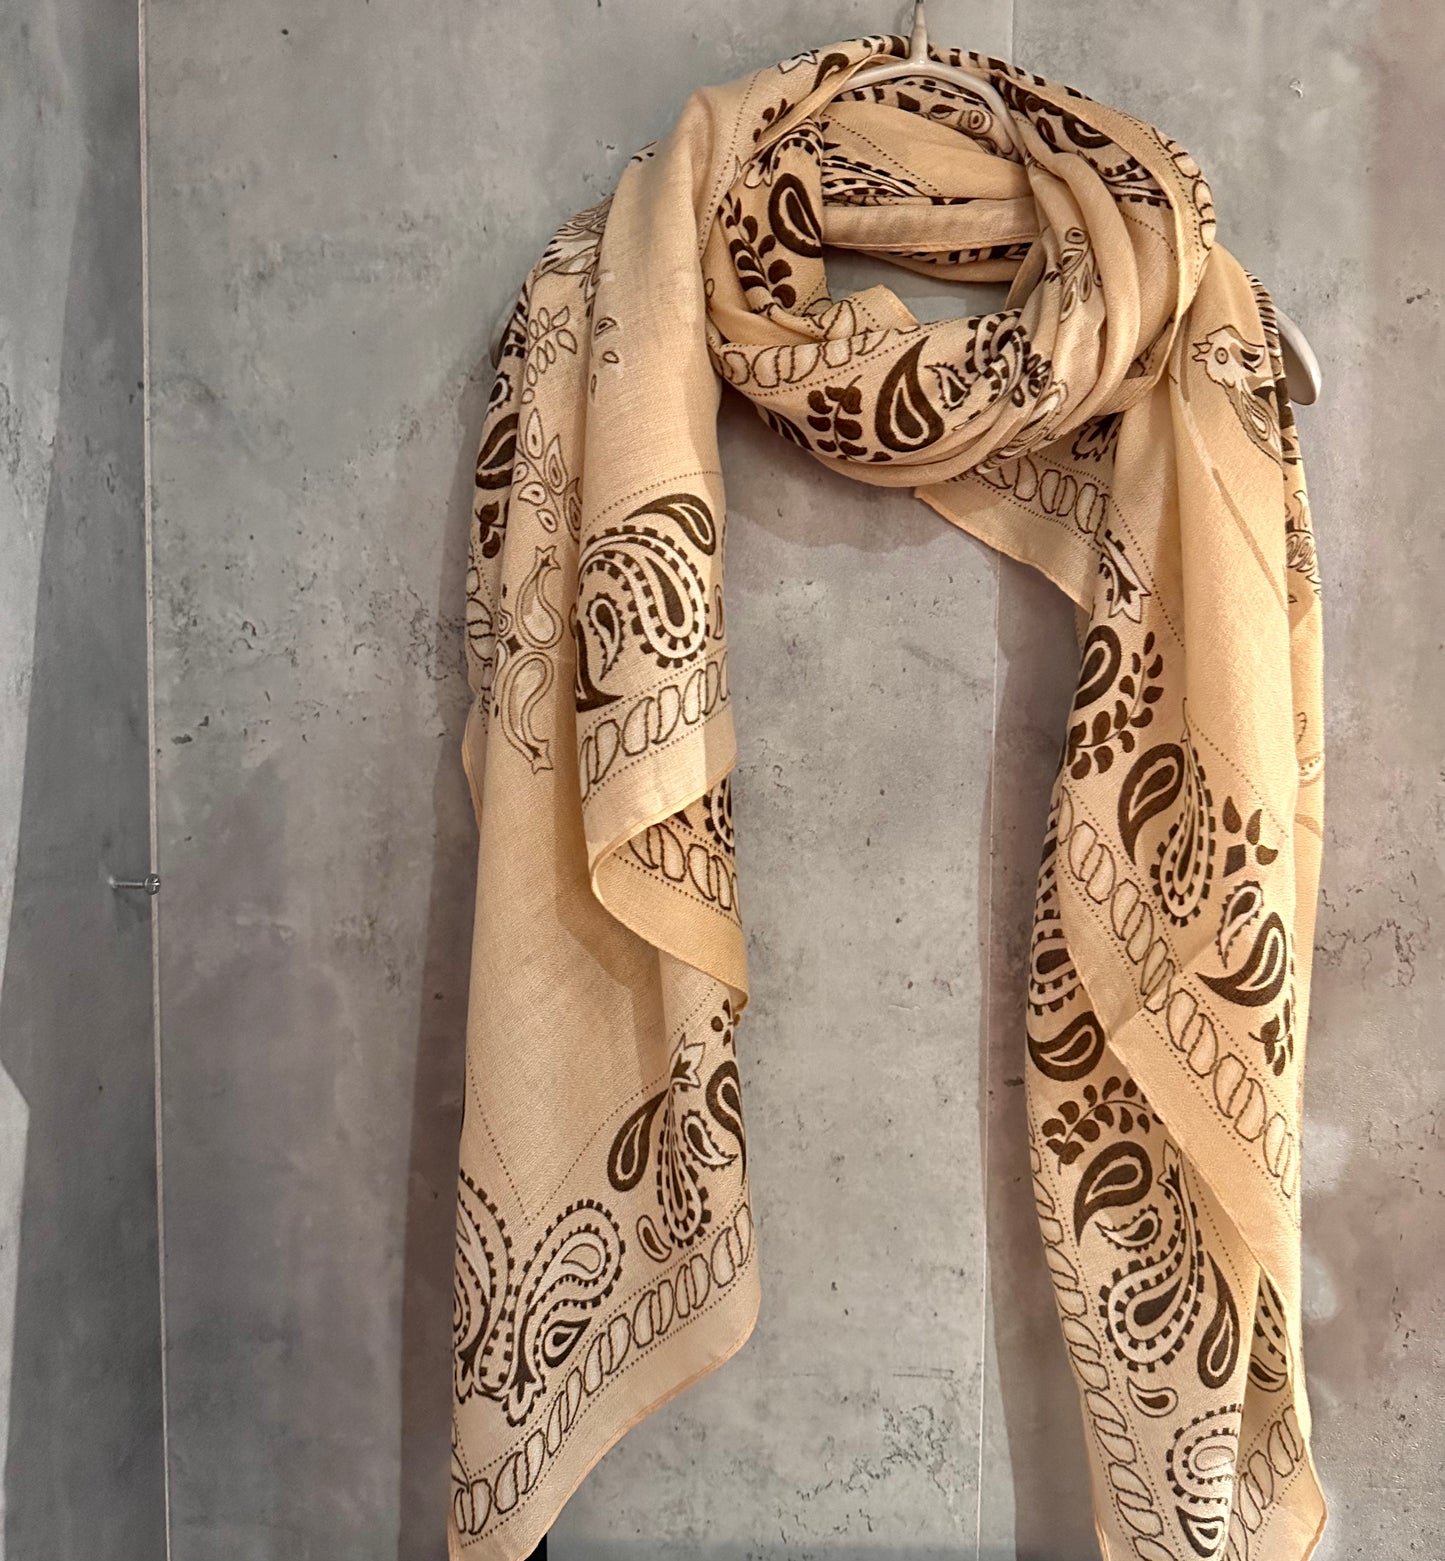 Paisley Beige Cotton Scarf/Summer Autumn Scarf/Scarf Women/Gifts For Mom/Gifts For Her Birthday Christmas/UK Seller